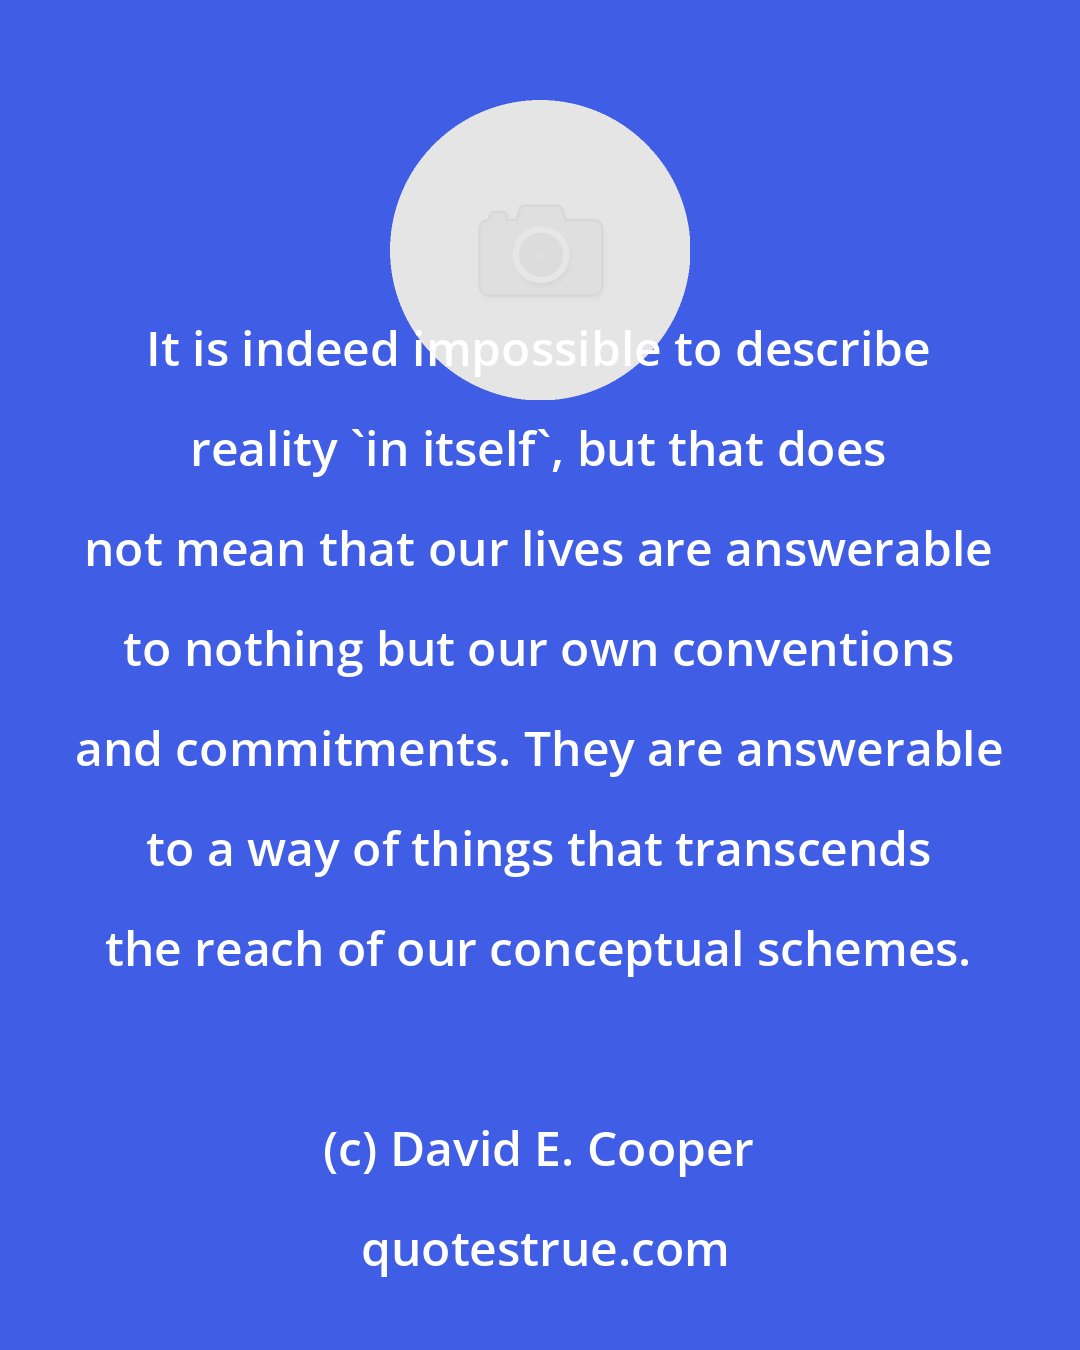 David E. Cooper: It is indeed impossible to describe reality 'in itself', but that does not mean that our lives are answerable to nothing but our own conventions and commitments. They are answerable to a way of things that transcends the reach of our conceptual schemes.